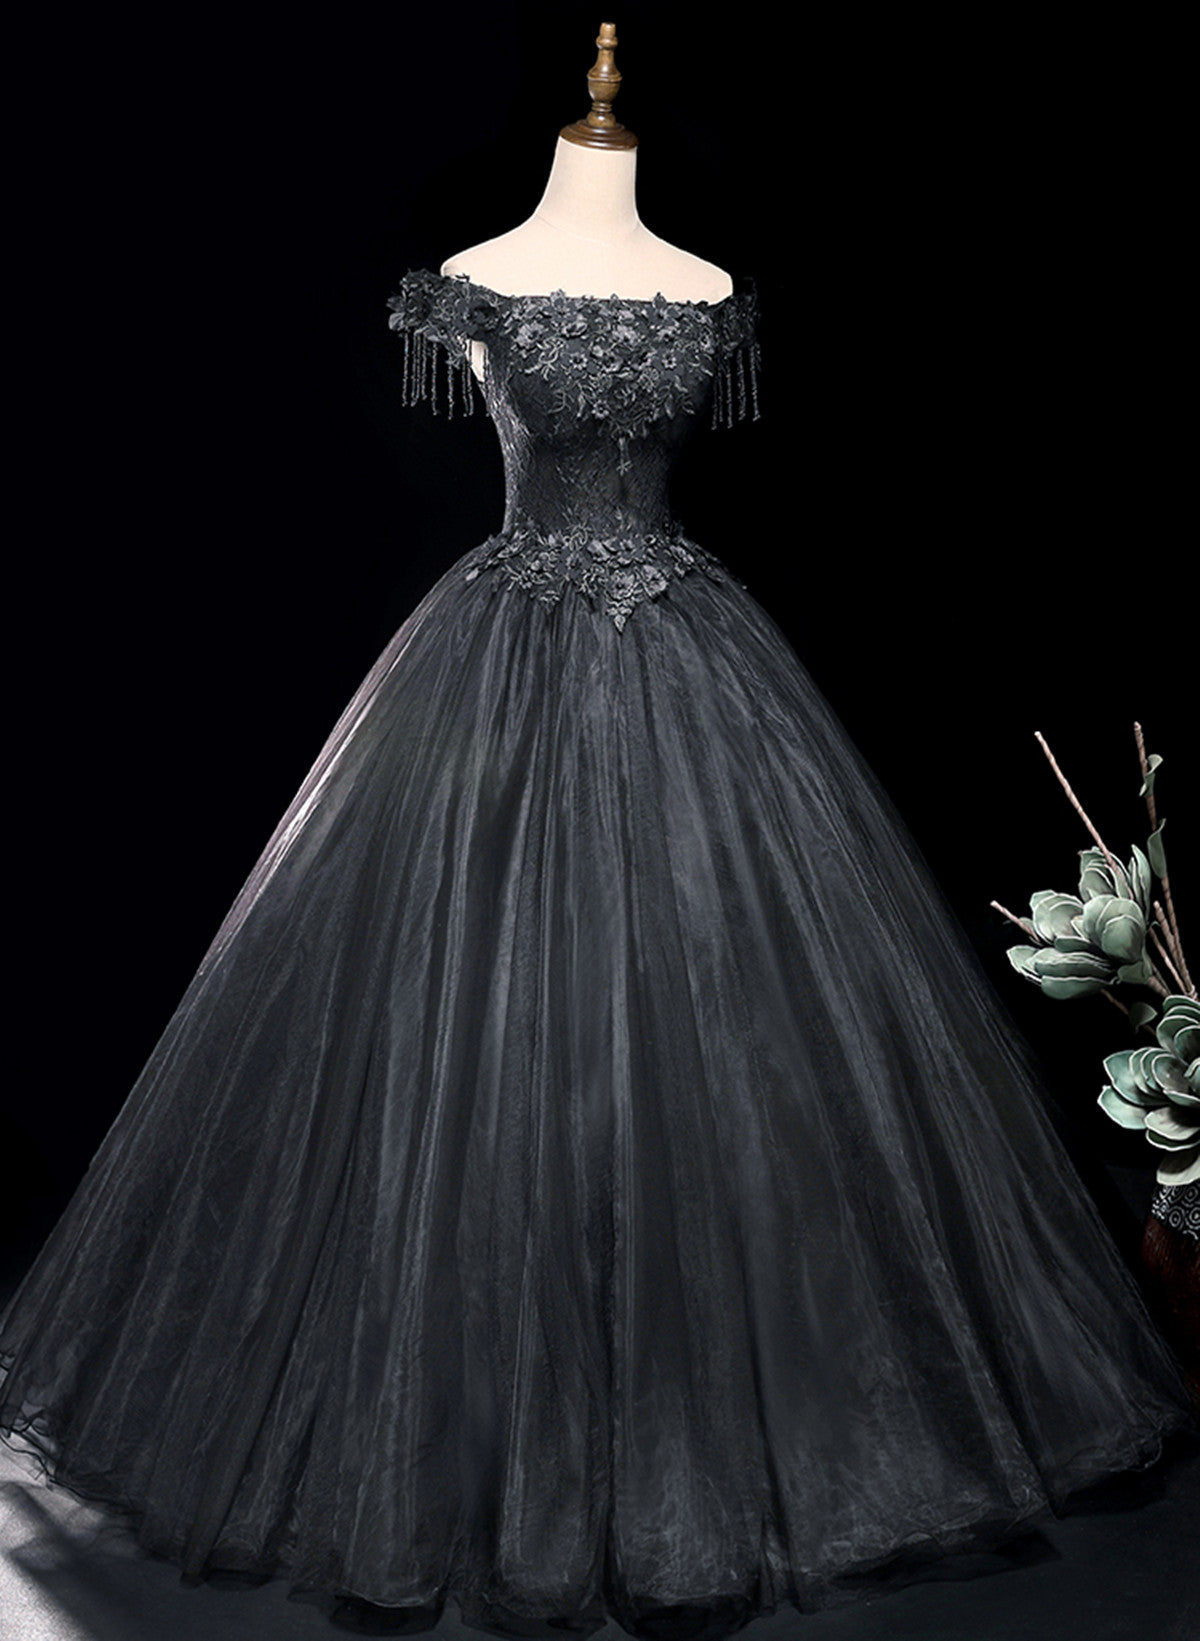 Prom Dress For Teen, Black Tulle Off Shoulder with Lace Applique Party Dress, Black Tulle Long Sweet 16 Dress